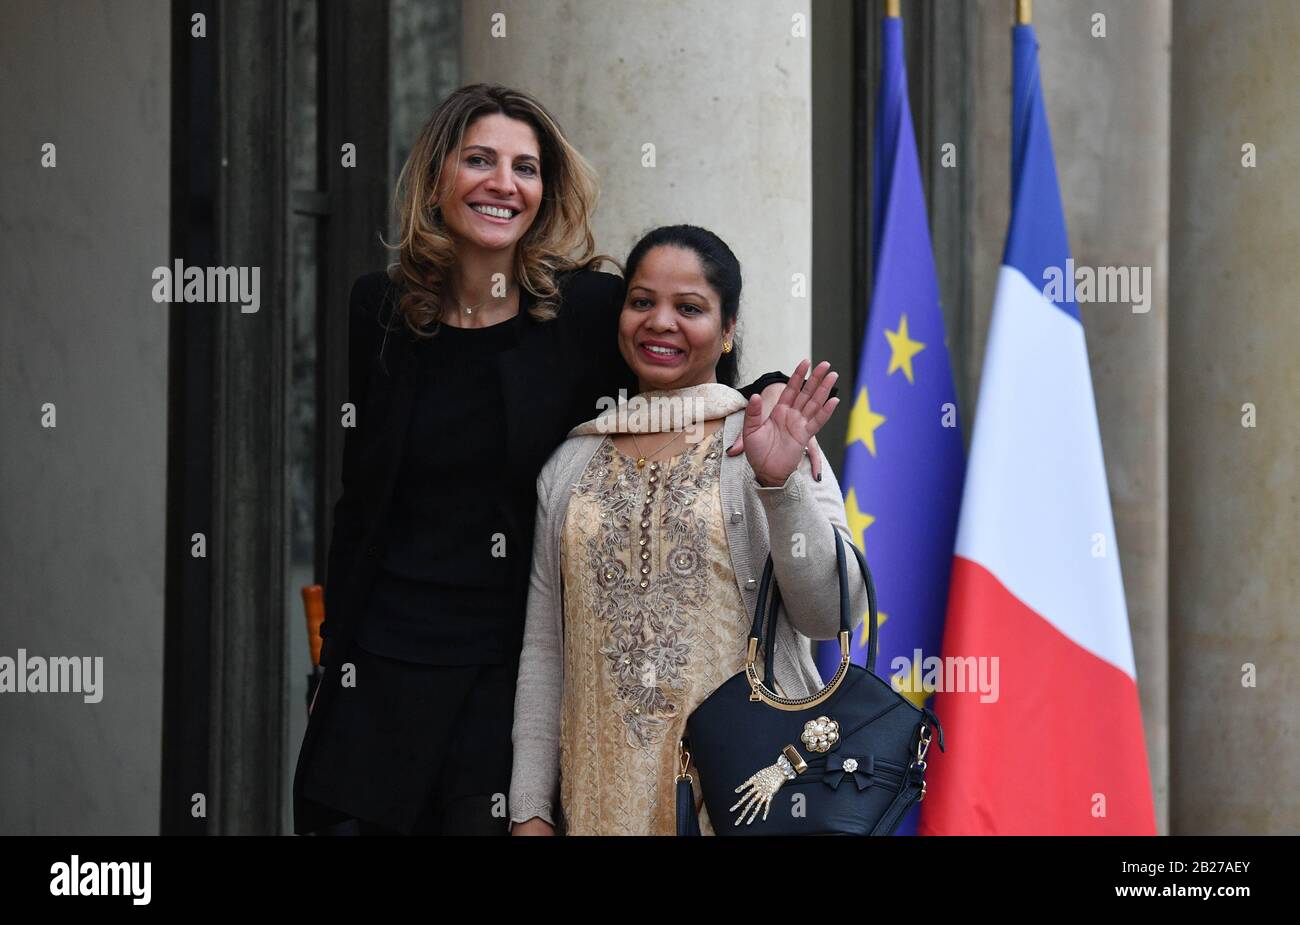 STRICTLY NO SALES TO FRENCH MEDIA OR PUBLISHERS - RIGHTS RESERVED  ***February 28, 2020 - Paris, France: Asia Bibi (R), a Pakistani Christian,  arrives with French journalist Anne-Isabelle Tollet at the